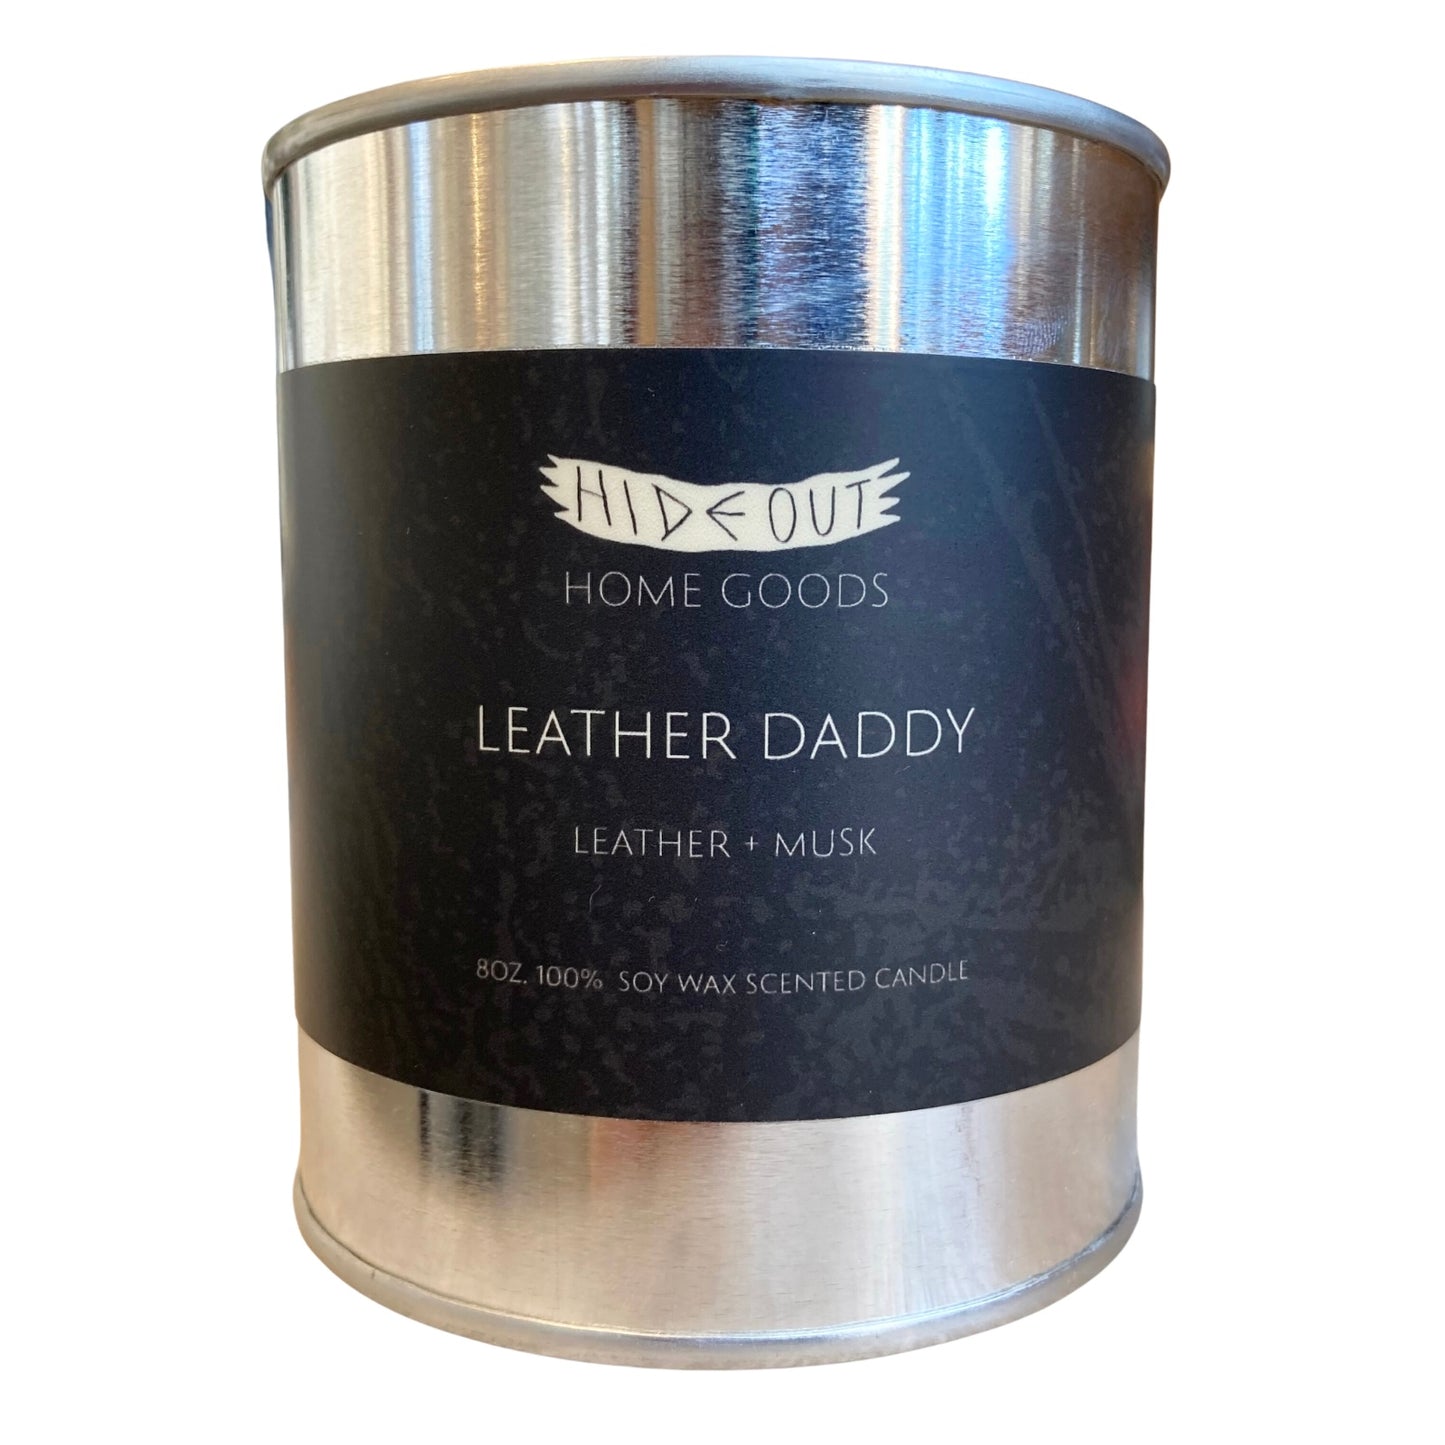 Scented Soy Candle | Leather Daddy | Leather + Musk